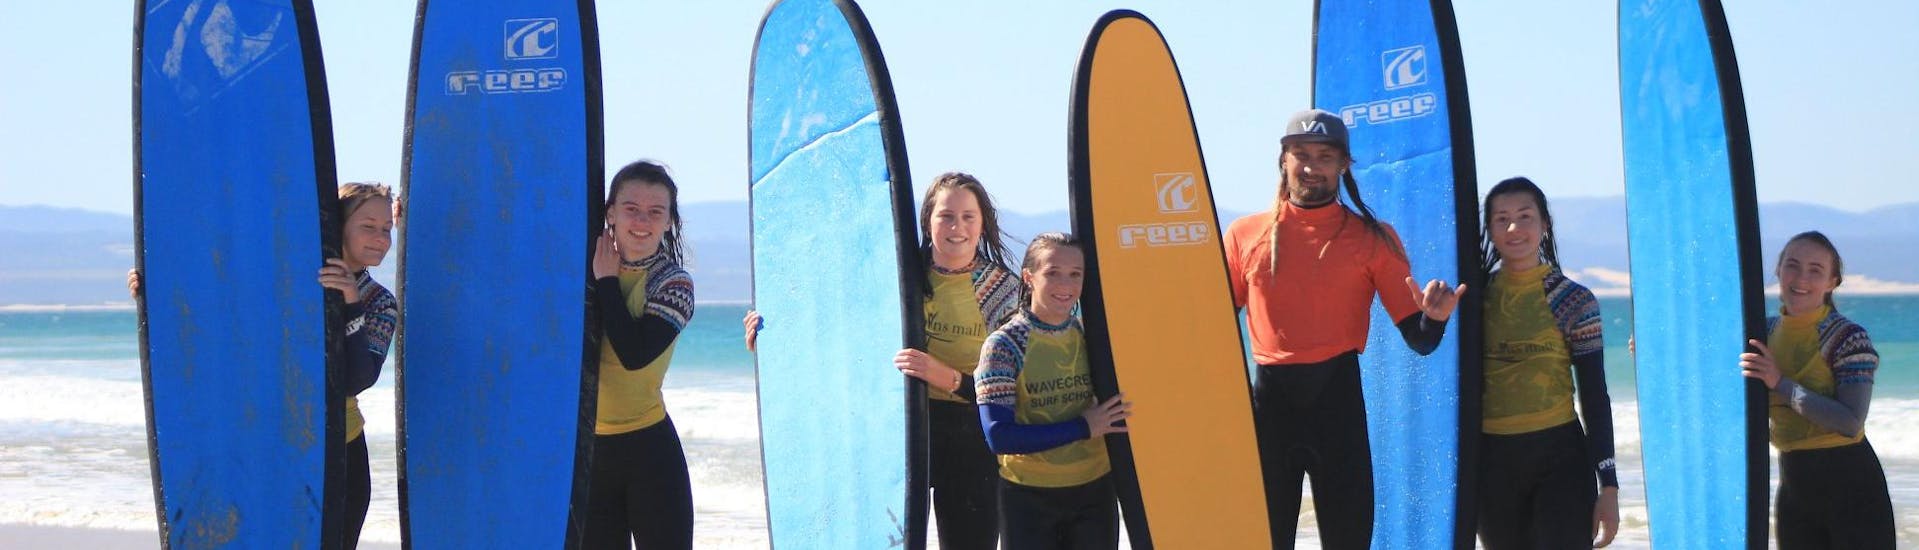 A group of happy surfers is taking a photo with their friendly surfing instructor from Wavecrest Surf School in Jeffreys Bay.